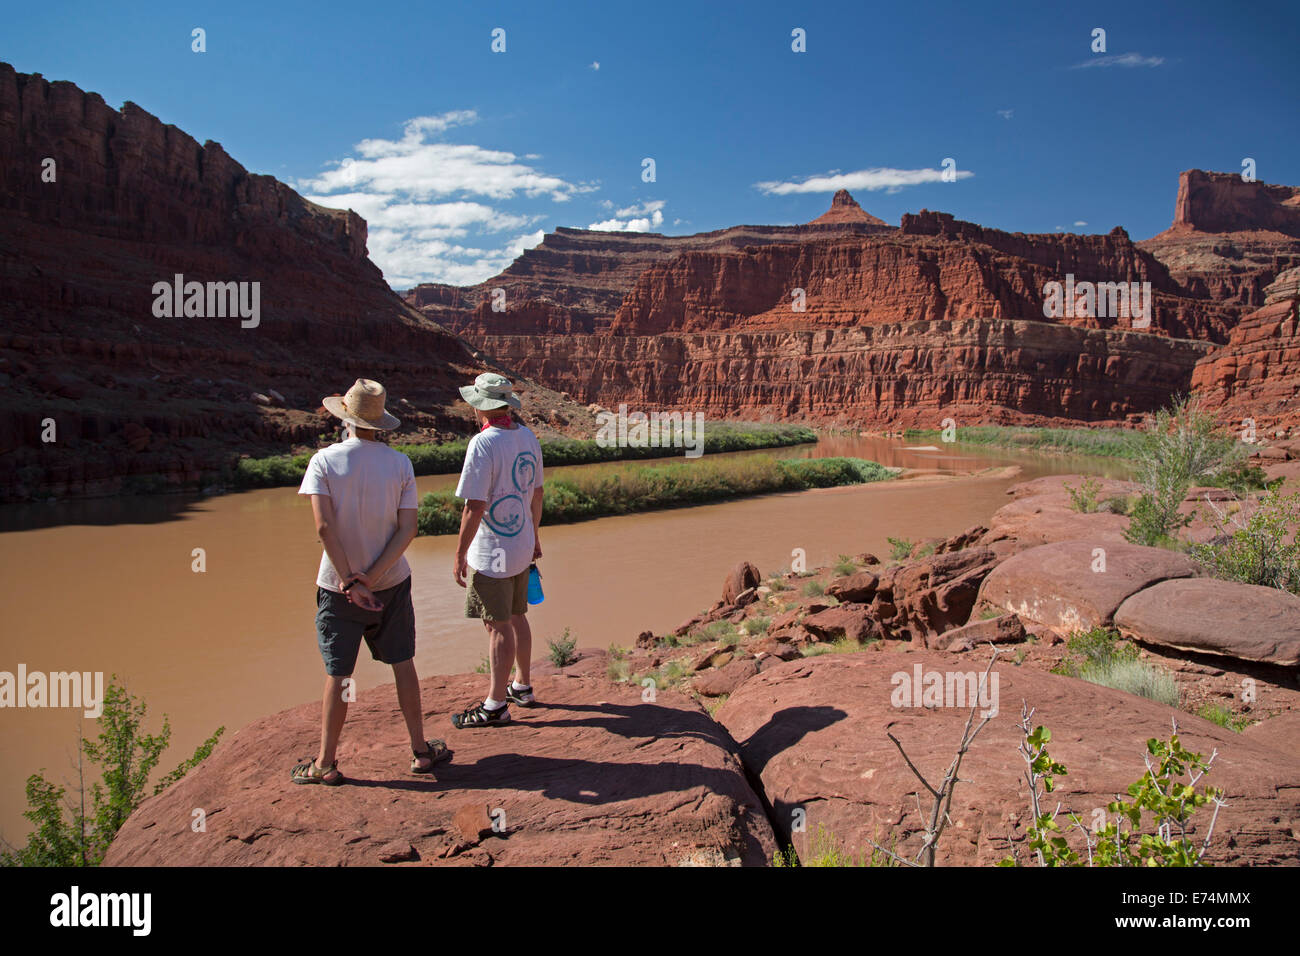 Canyonlands National Park, Utah - Two people stand above the Colorado River while on a river rafting trip. Stock Photo